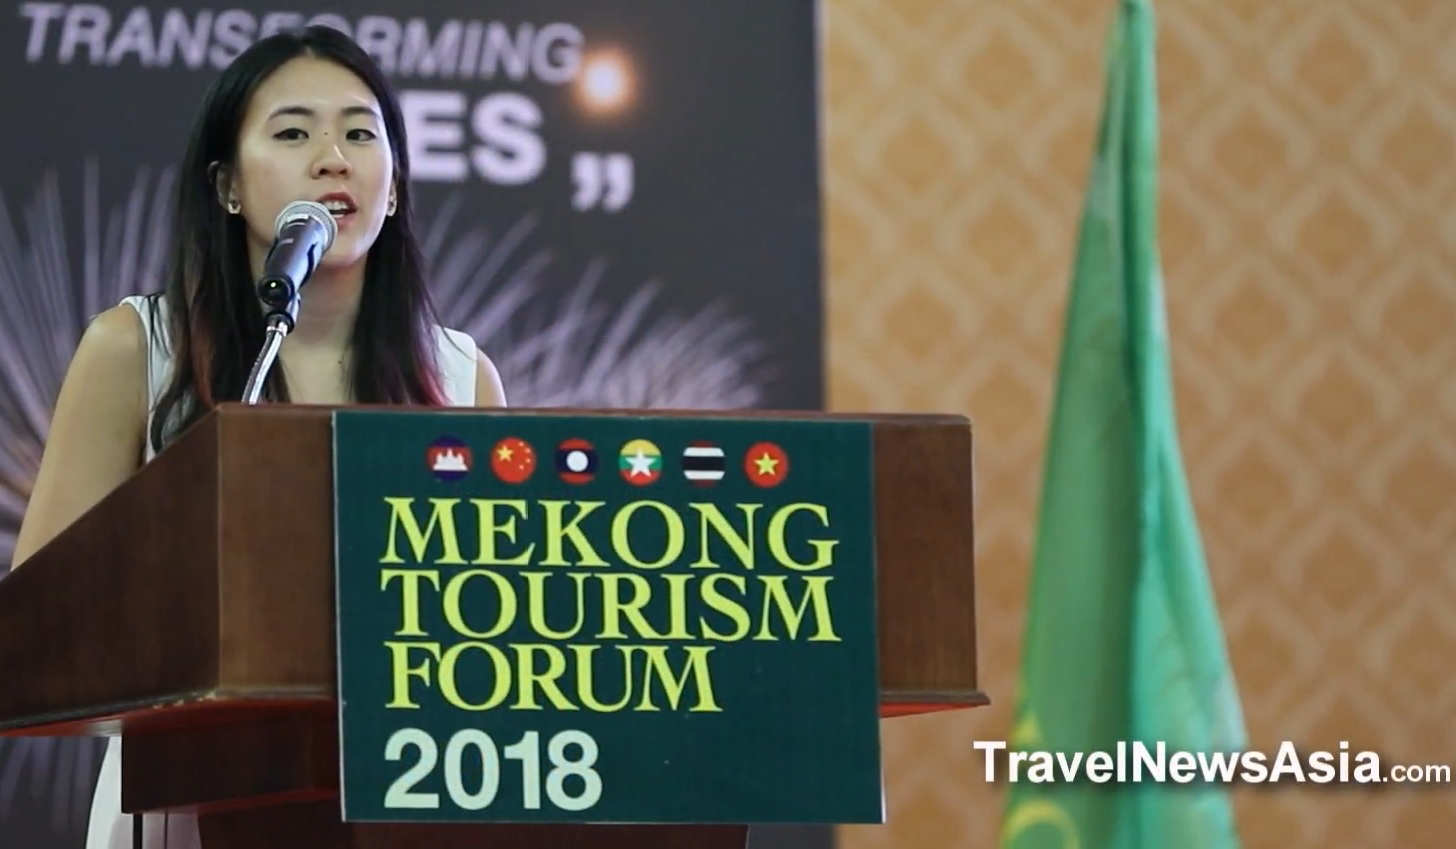 Mich Goh, Airbnb’s Head of Public Policy for Southeast Asia, gave an interesting presenation at the Mekong Tourism Forum 2018. Click to enlarge.